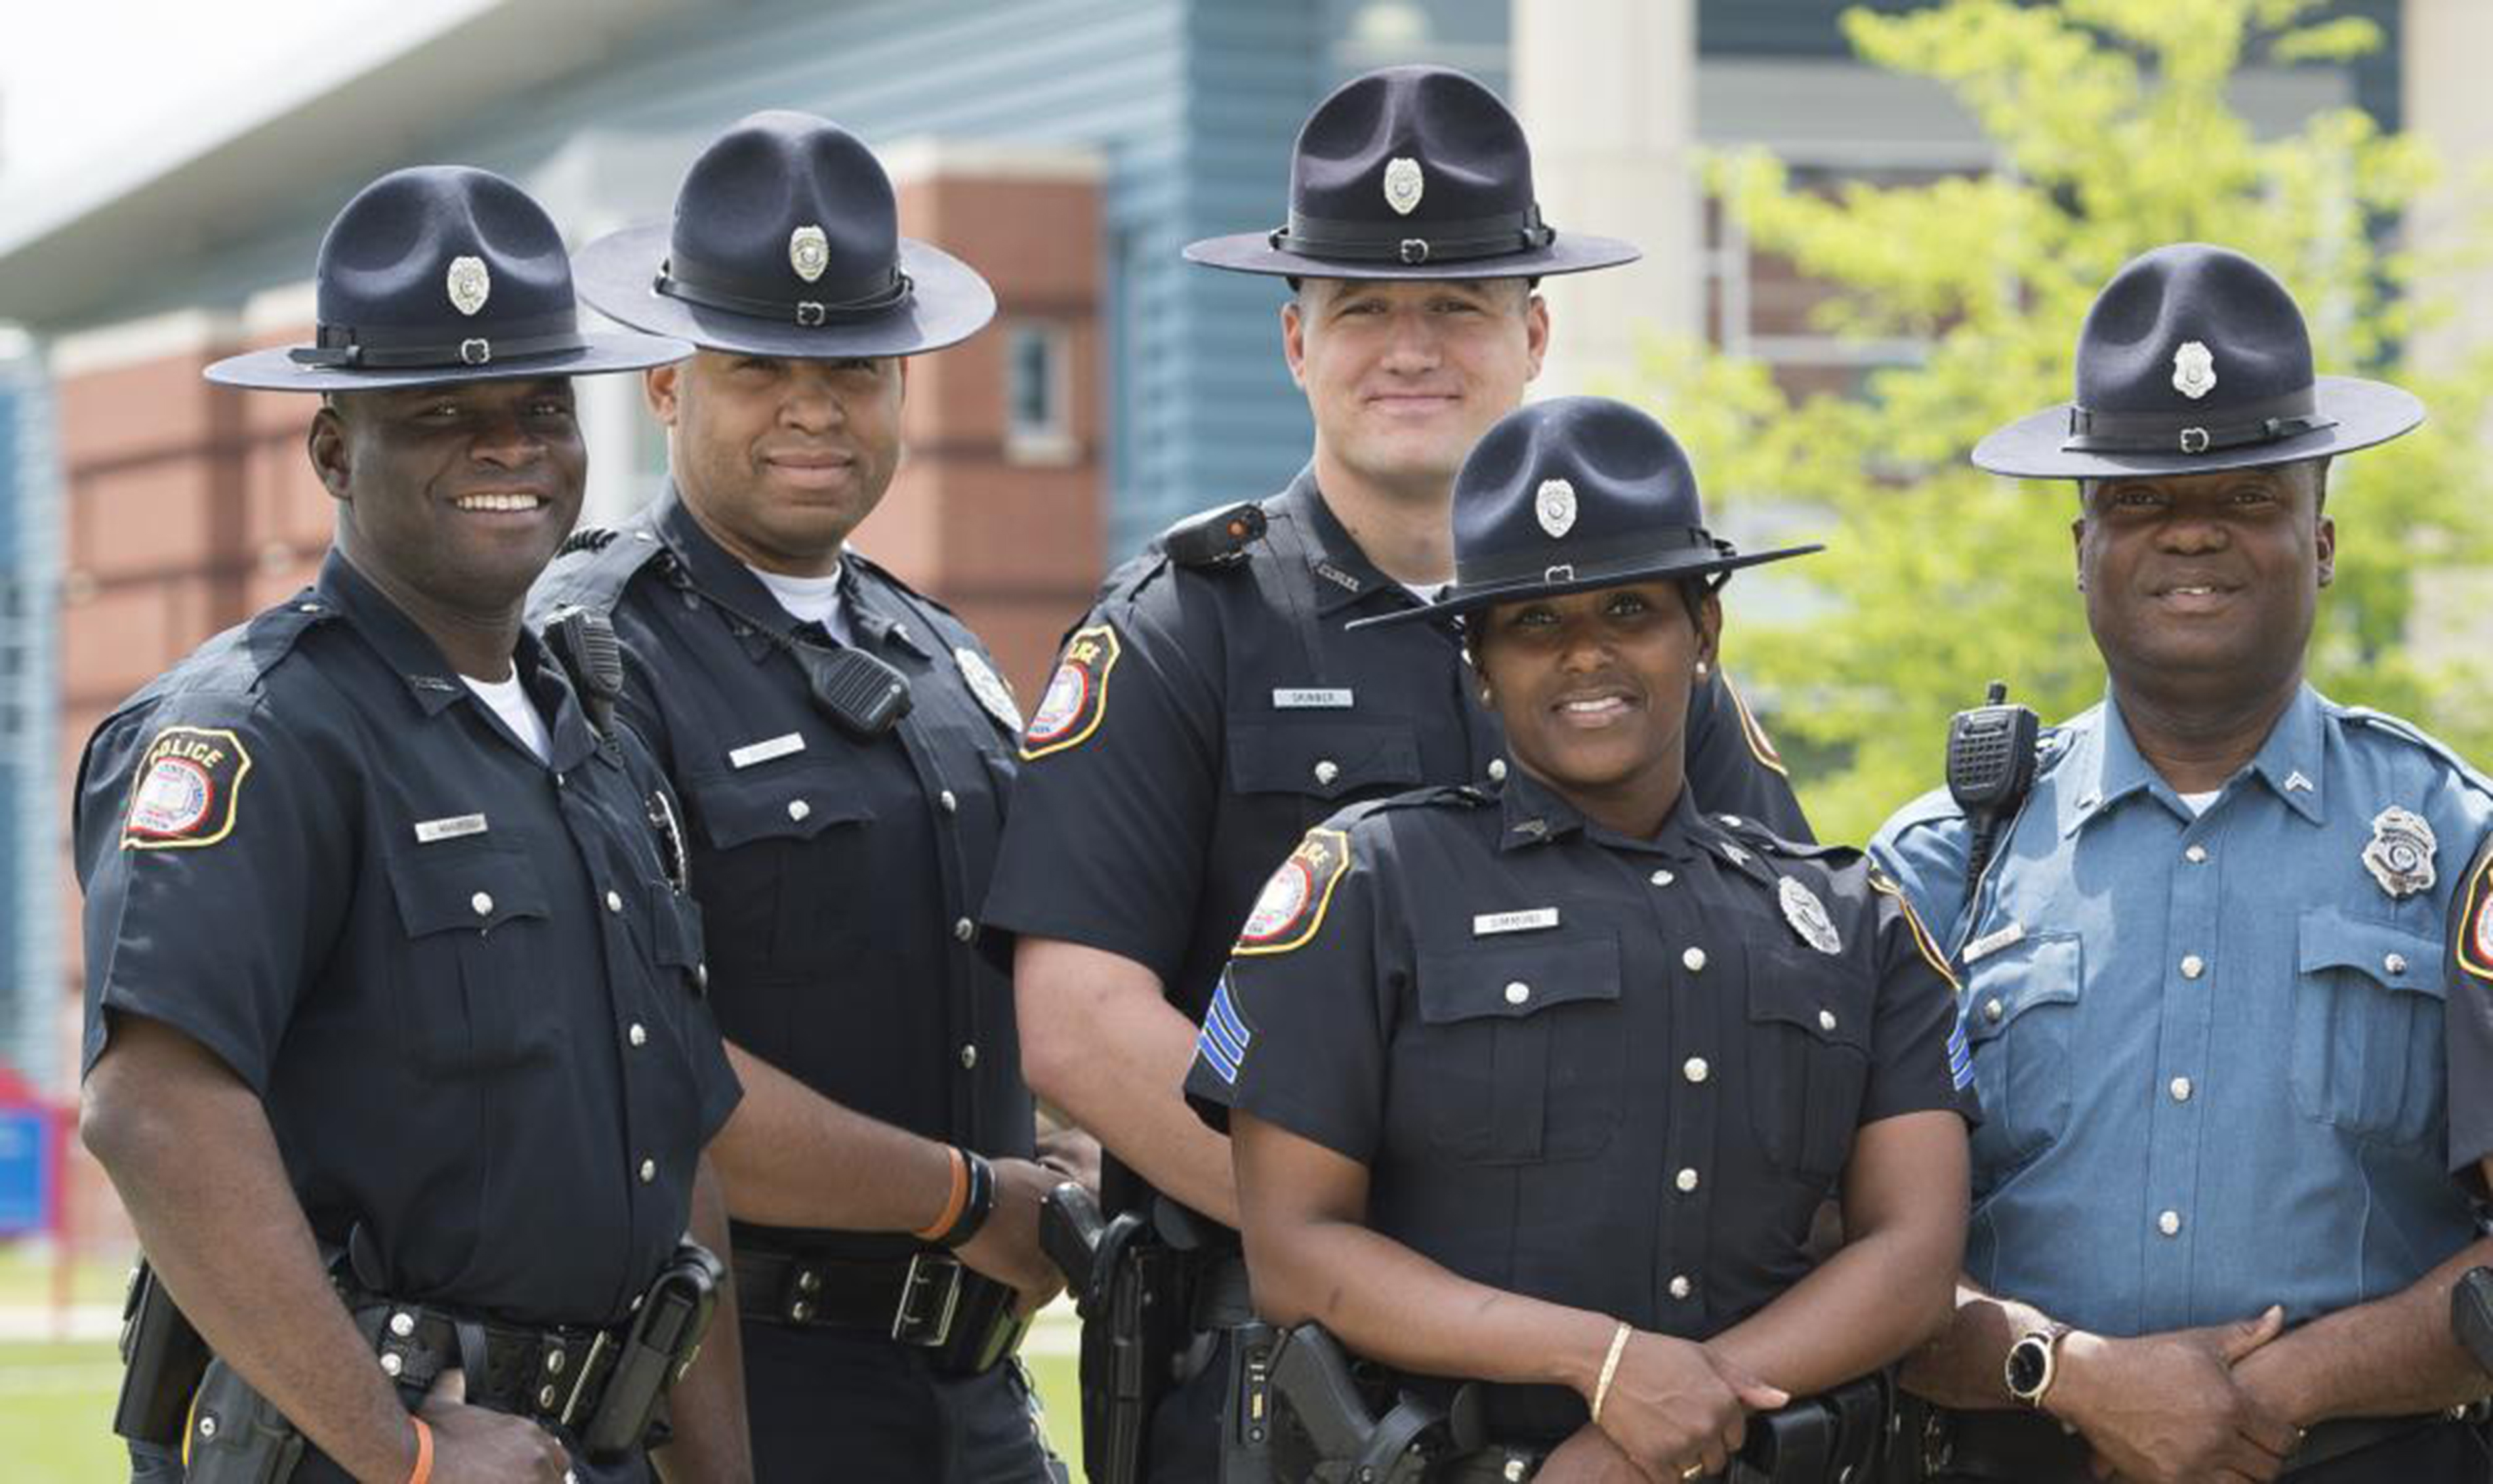 The University's Police Department and its Student Affairs and Athletics partners have been ranked among the Top 25 for the development of initiatives that keep its campus communities safe.